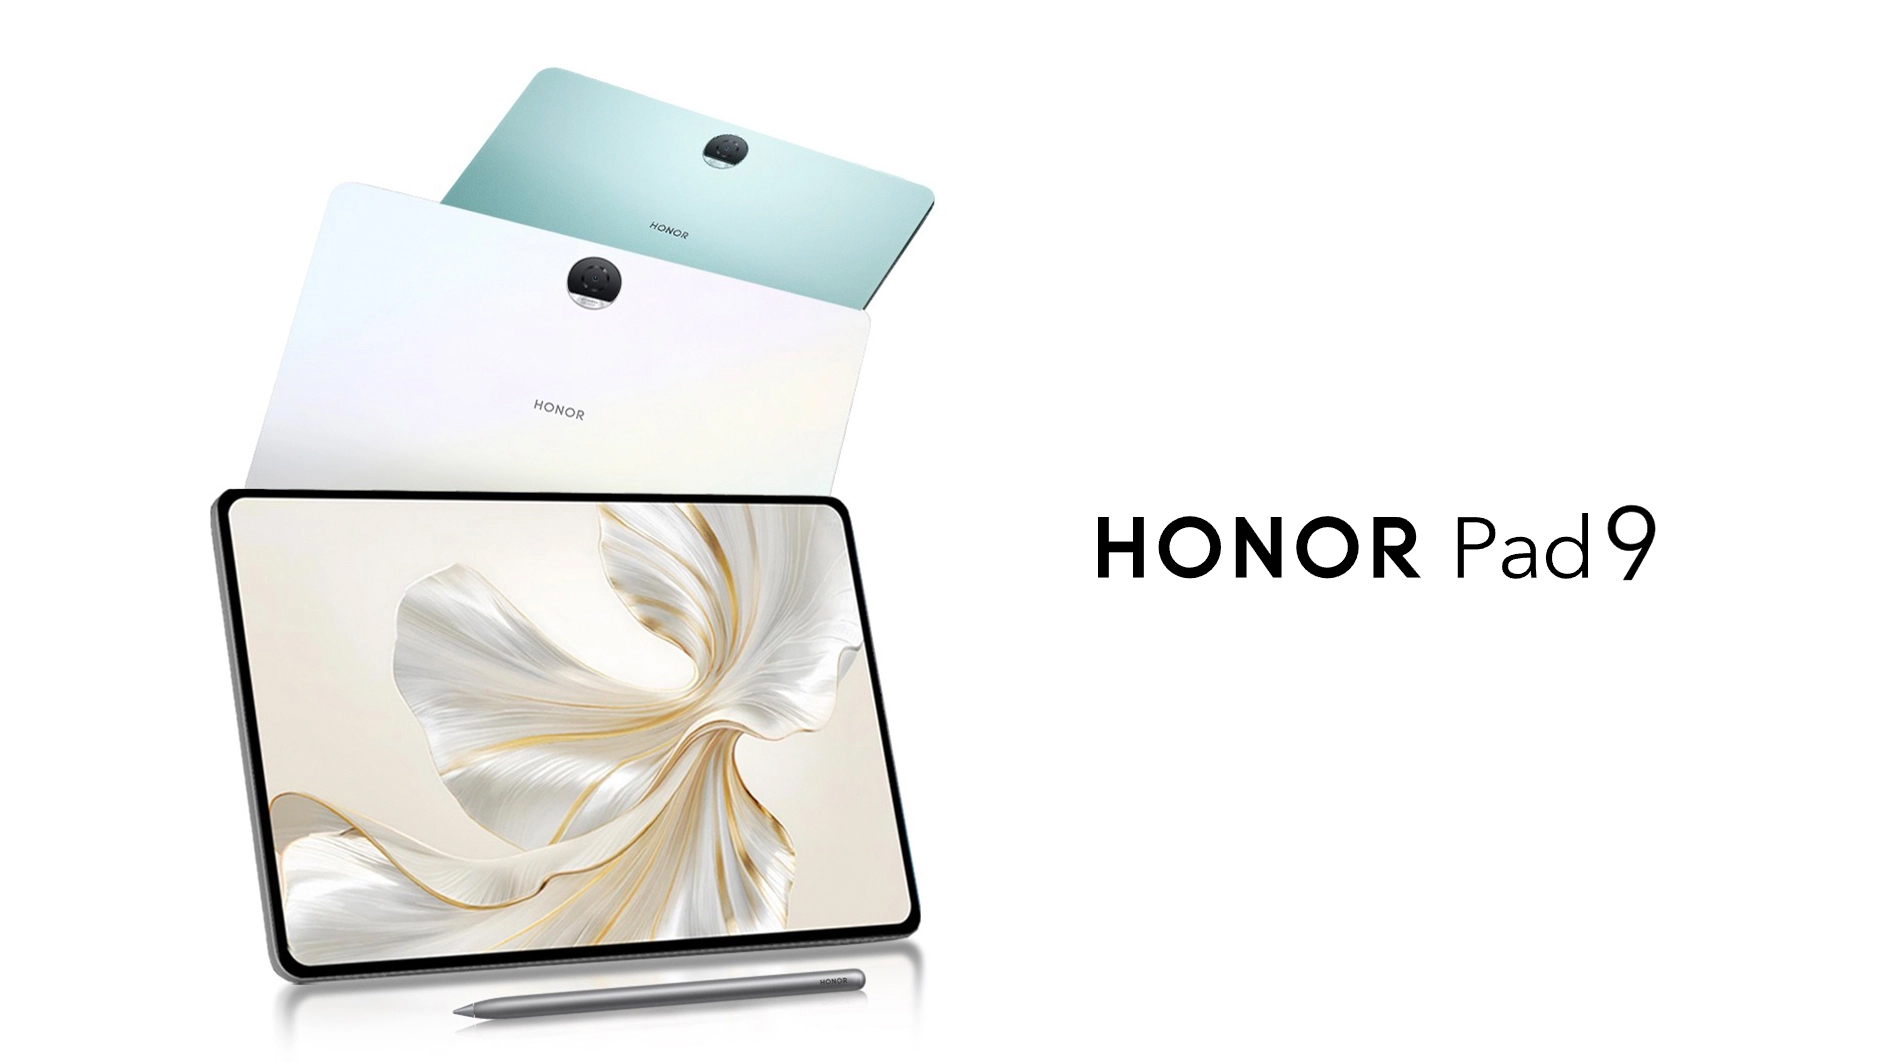 Honor Pad 9 breaks cover with paper-like display - NotebookCheck